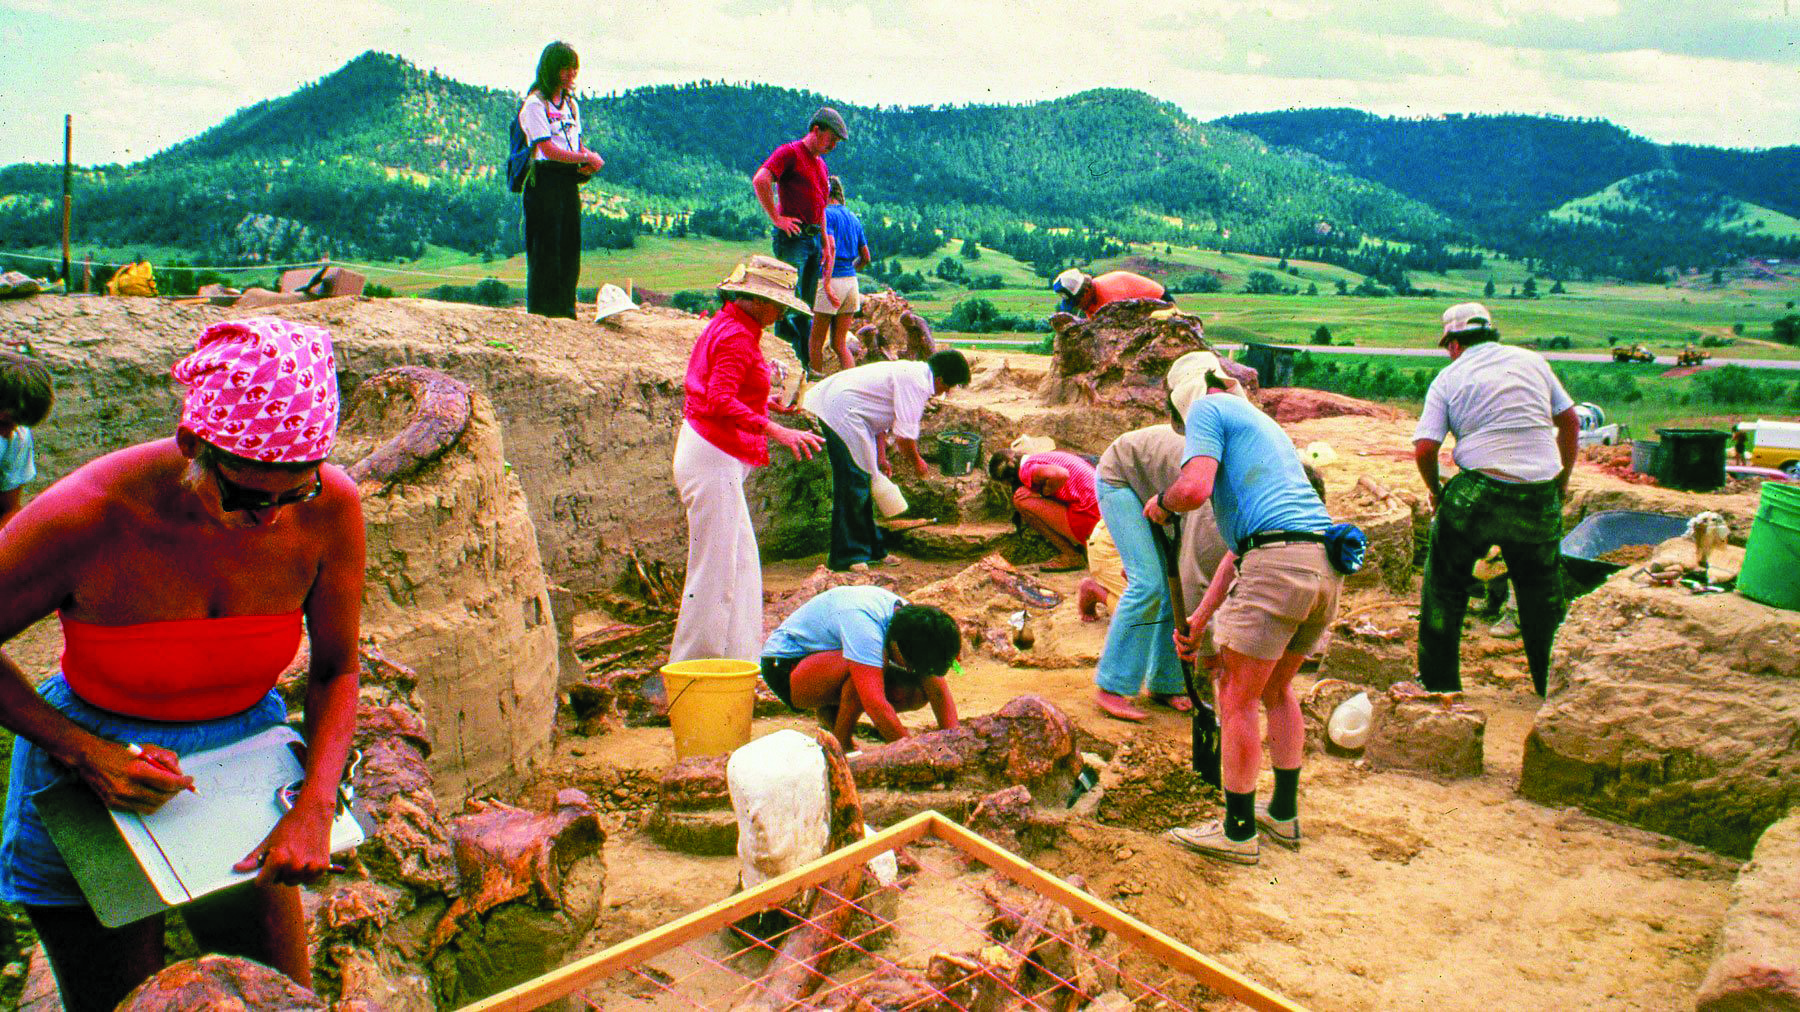 Excavators work to uncover mammoth bones during the early days of The Mammoth Site of Hot Springs, South Dakota. This week, the attraction and scientific site is celebrating its 50th anniversary with two celebrations on Friday and Saturday, June 21-22.